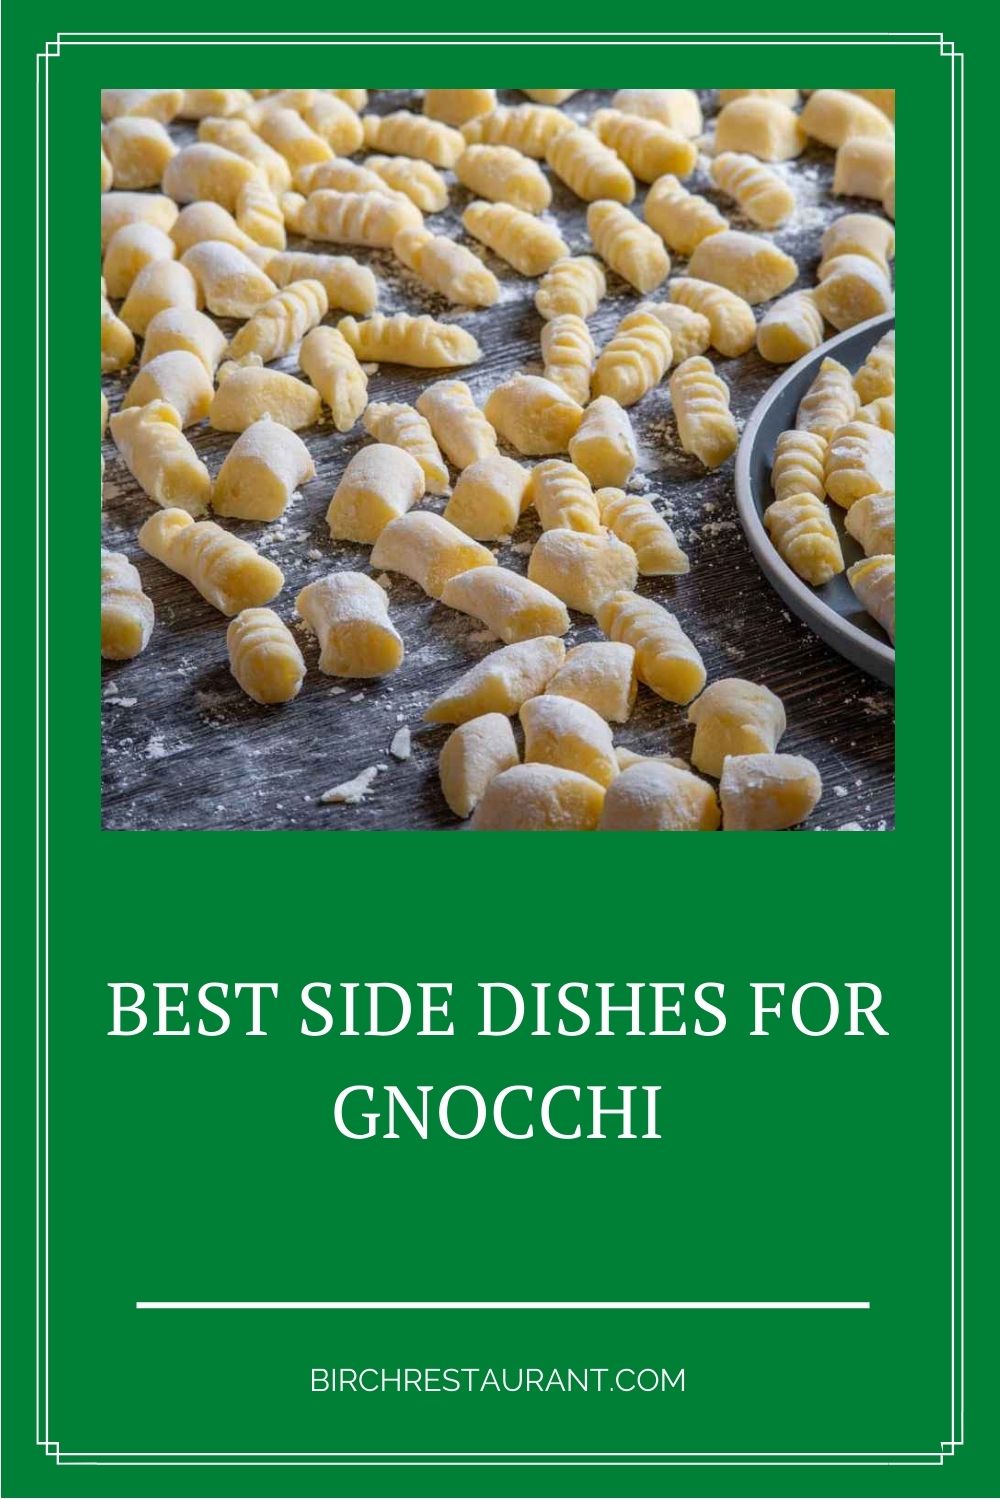 Best Side Dishes for Gnocchi You Should Know